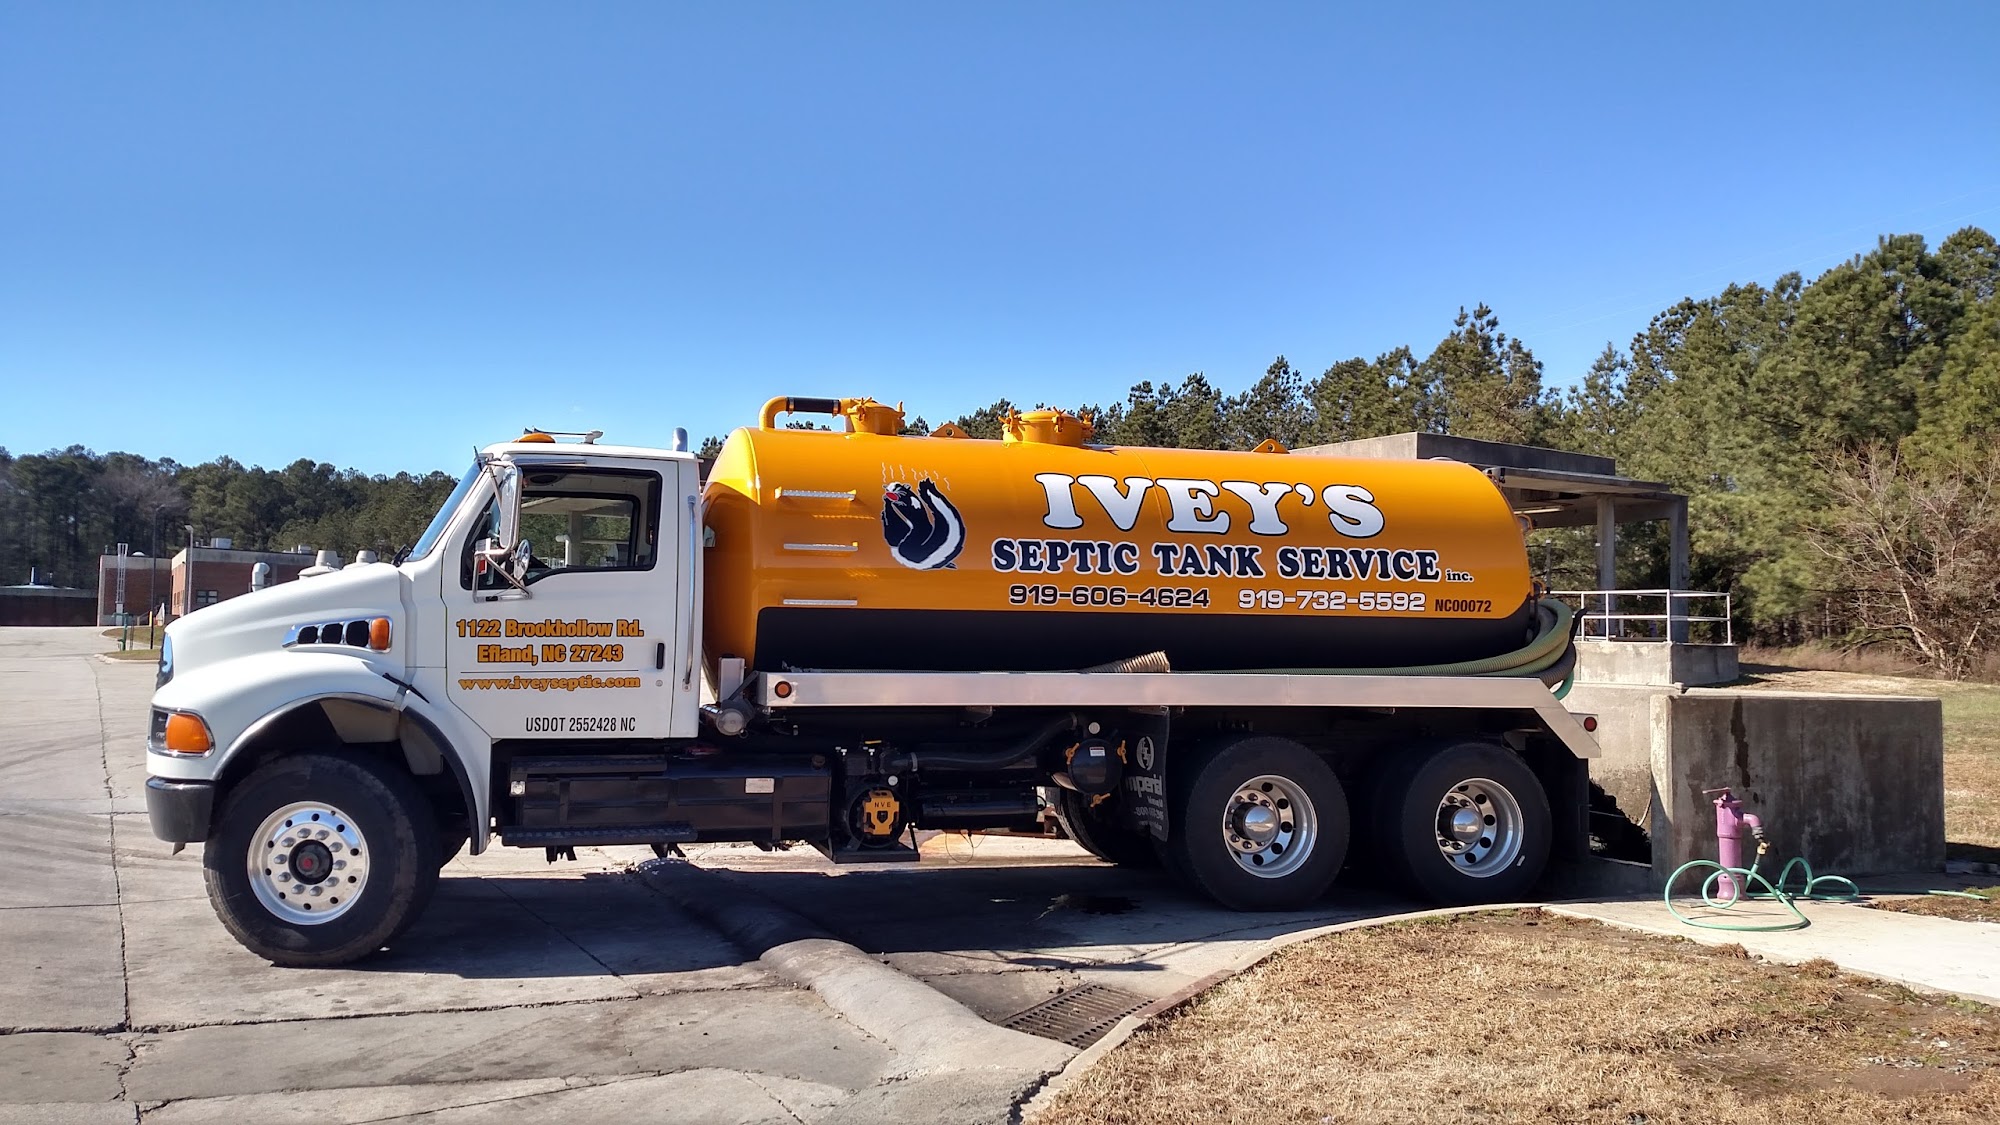 Ivey's Septic Tank Services 1122 Brookhollow Rd, Efland North Carolina 27243